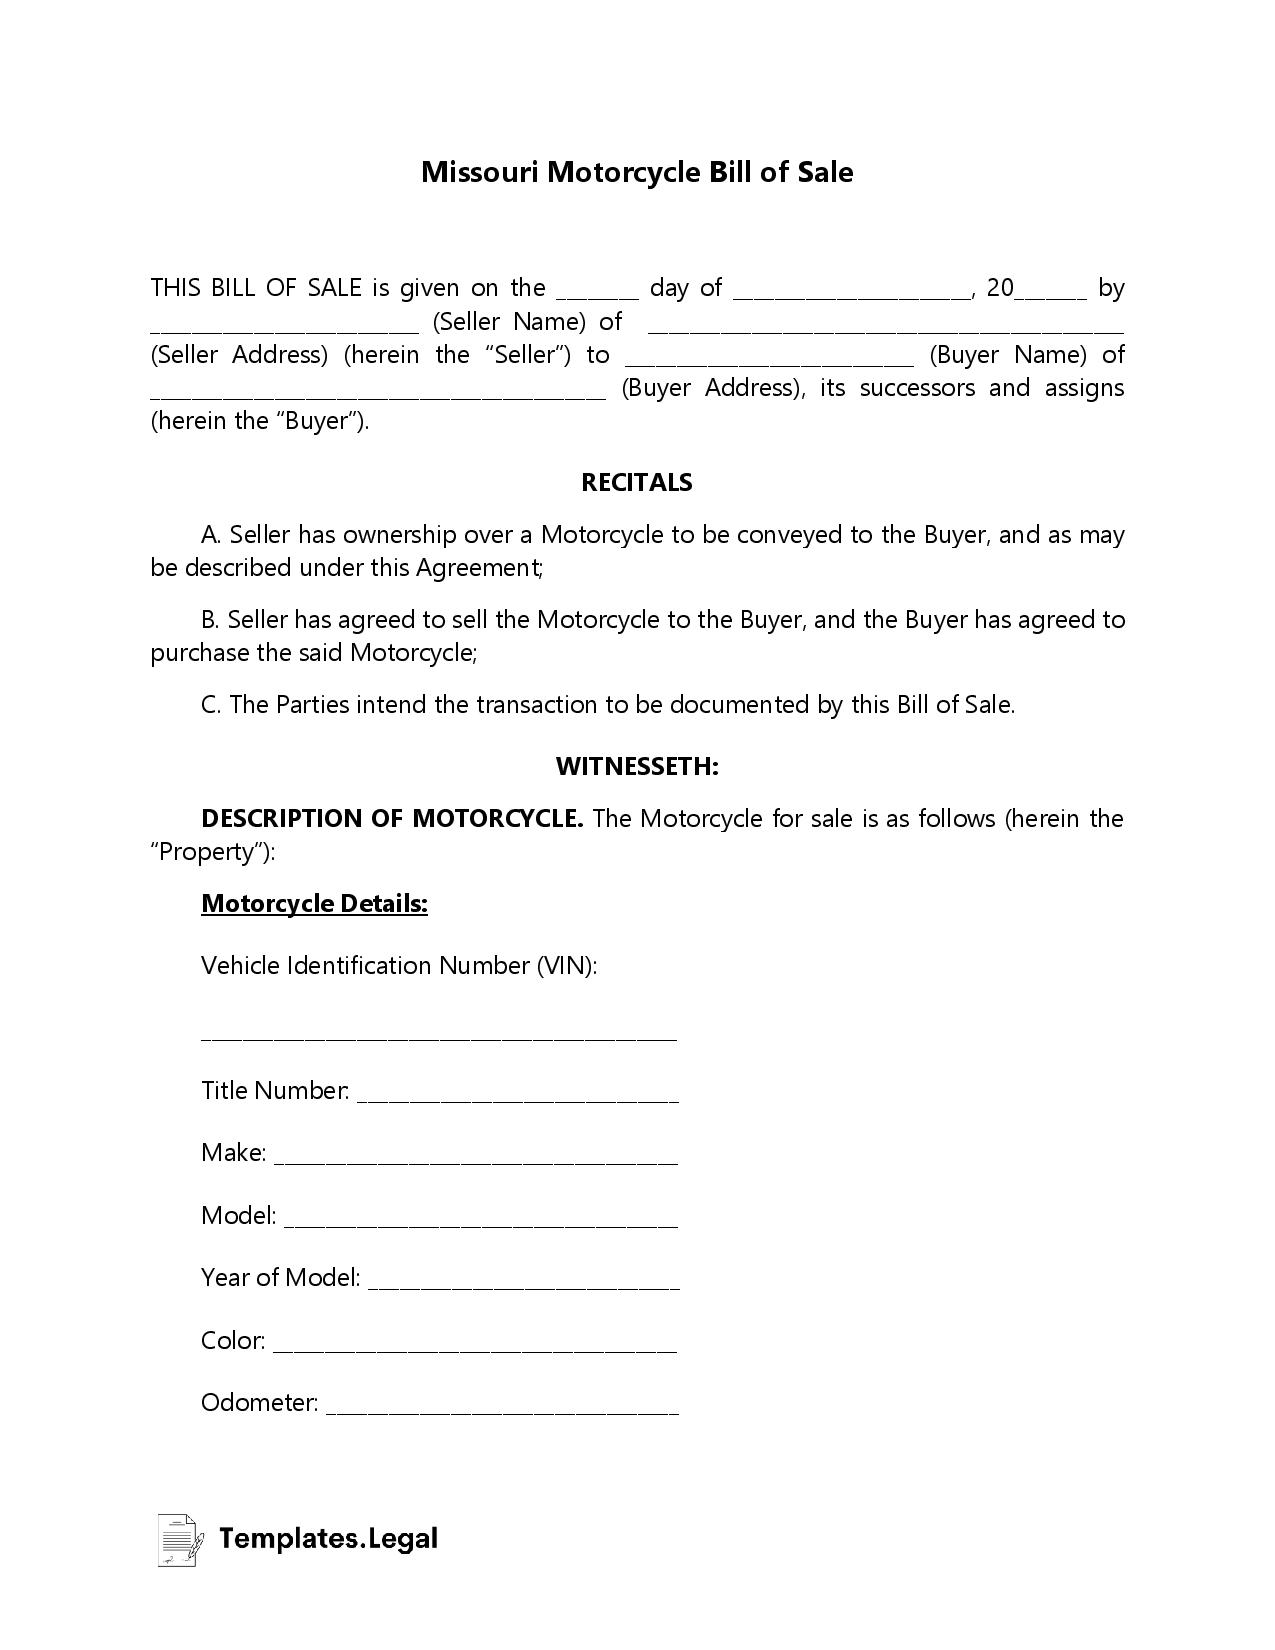 Missouri Motorcycle Bill of Sale - Templates.Legal